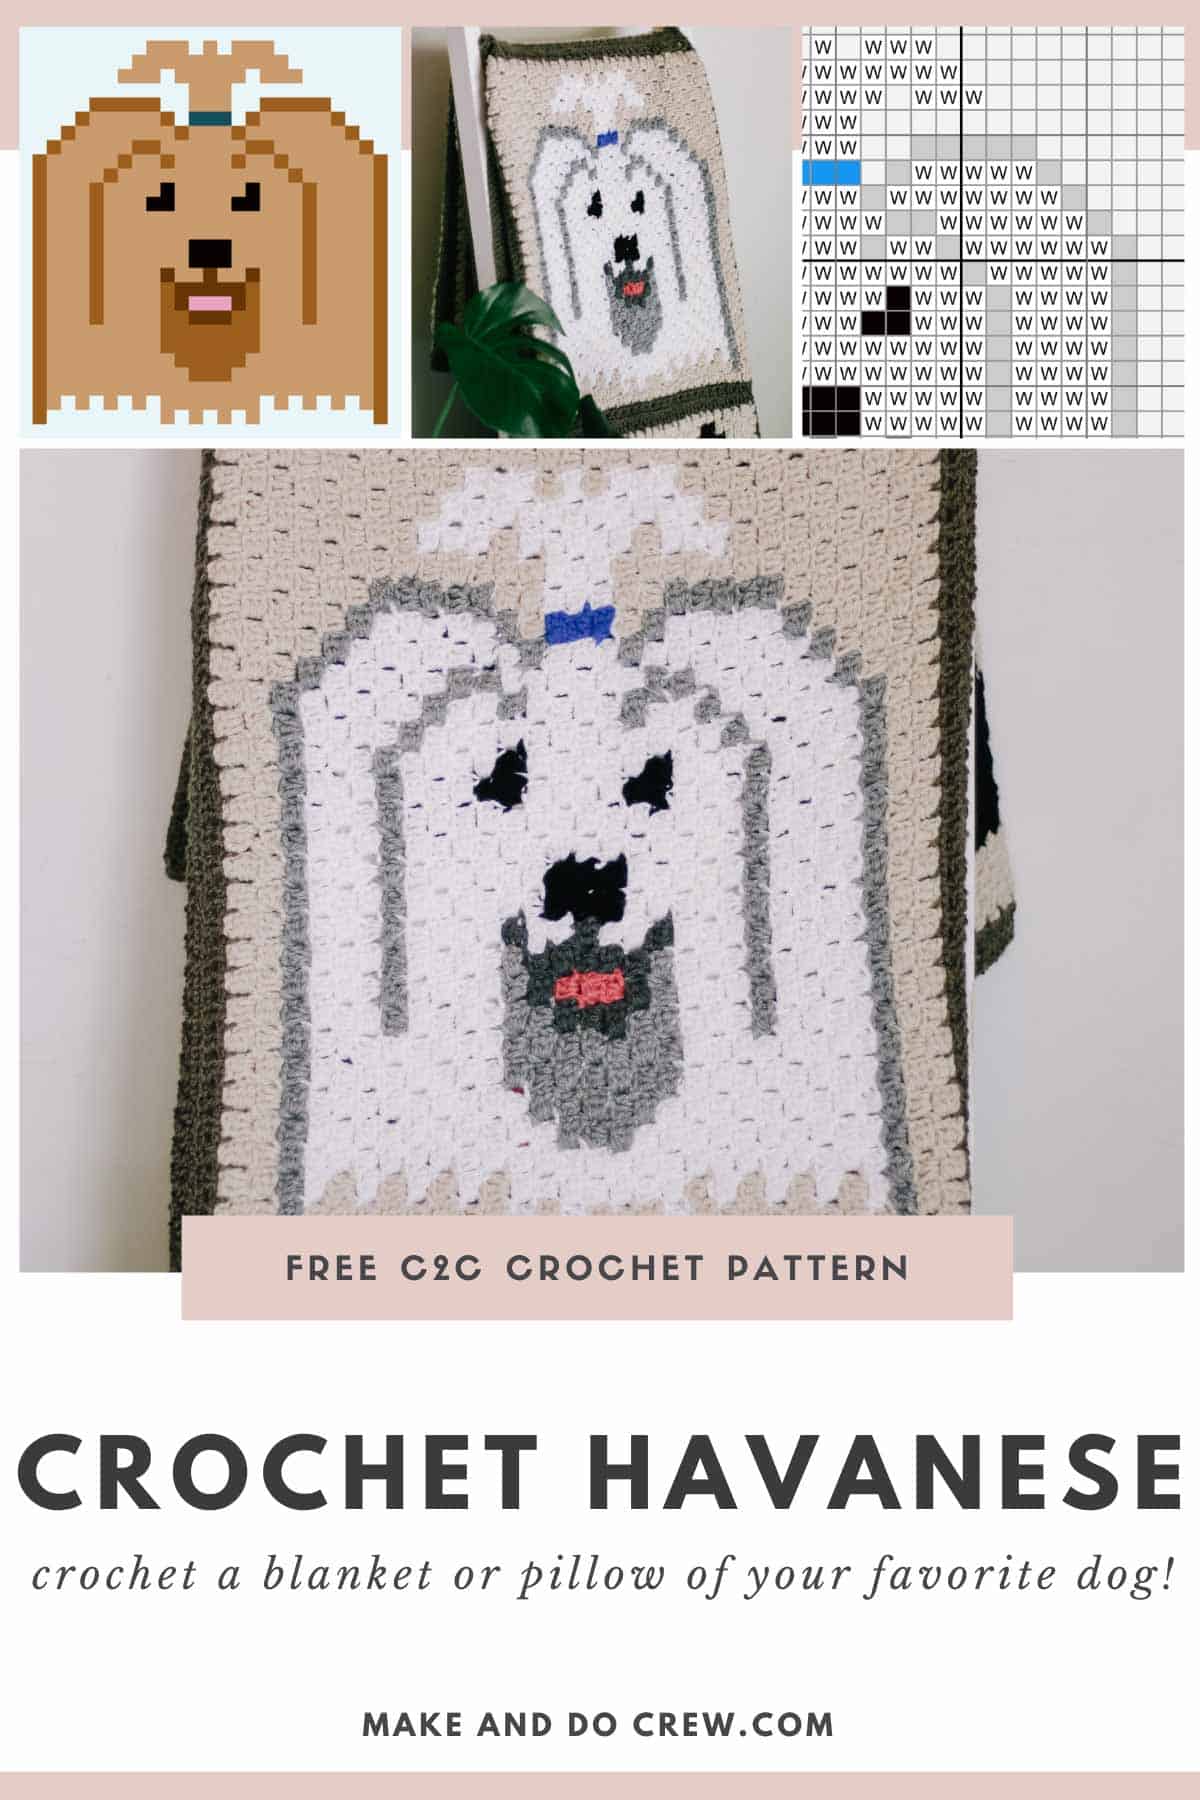 This image shows a corner to corner crochet havanese square free pattern.